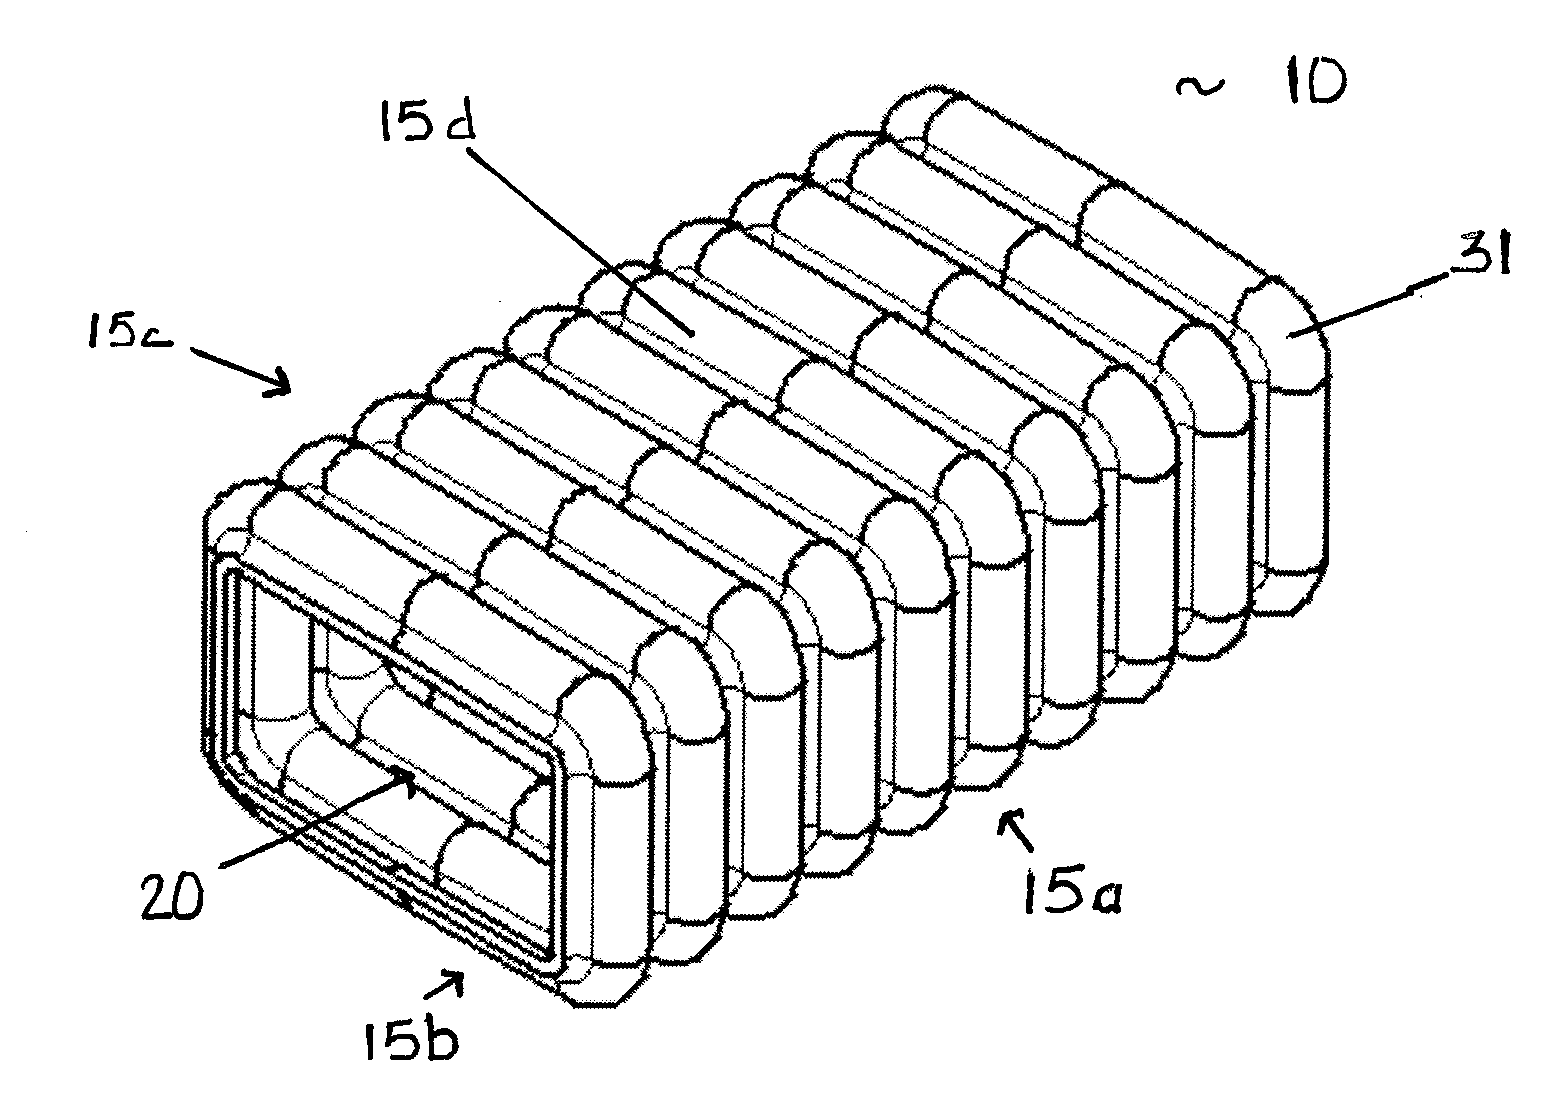 Corrugated tubular energy absorbing structure